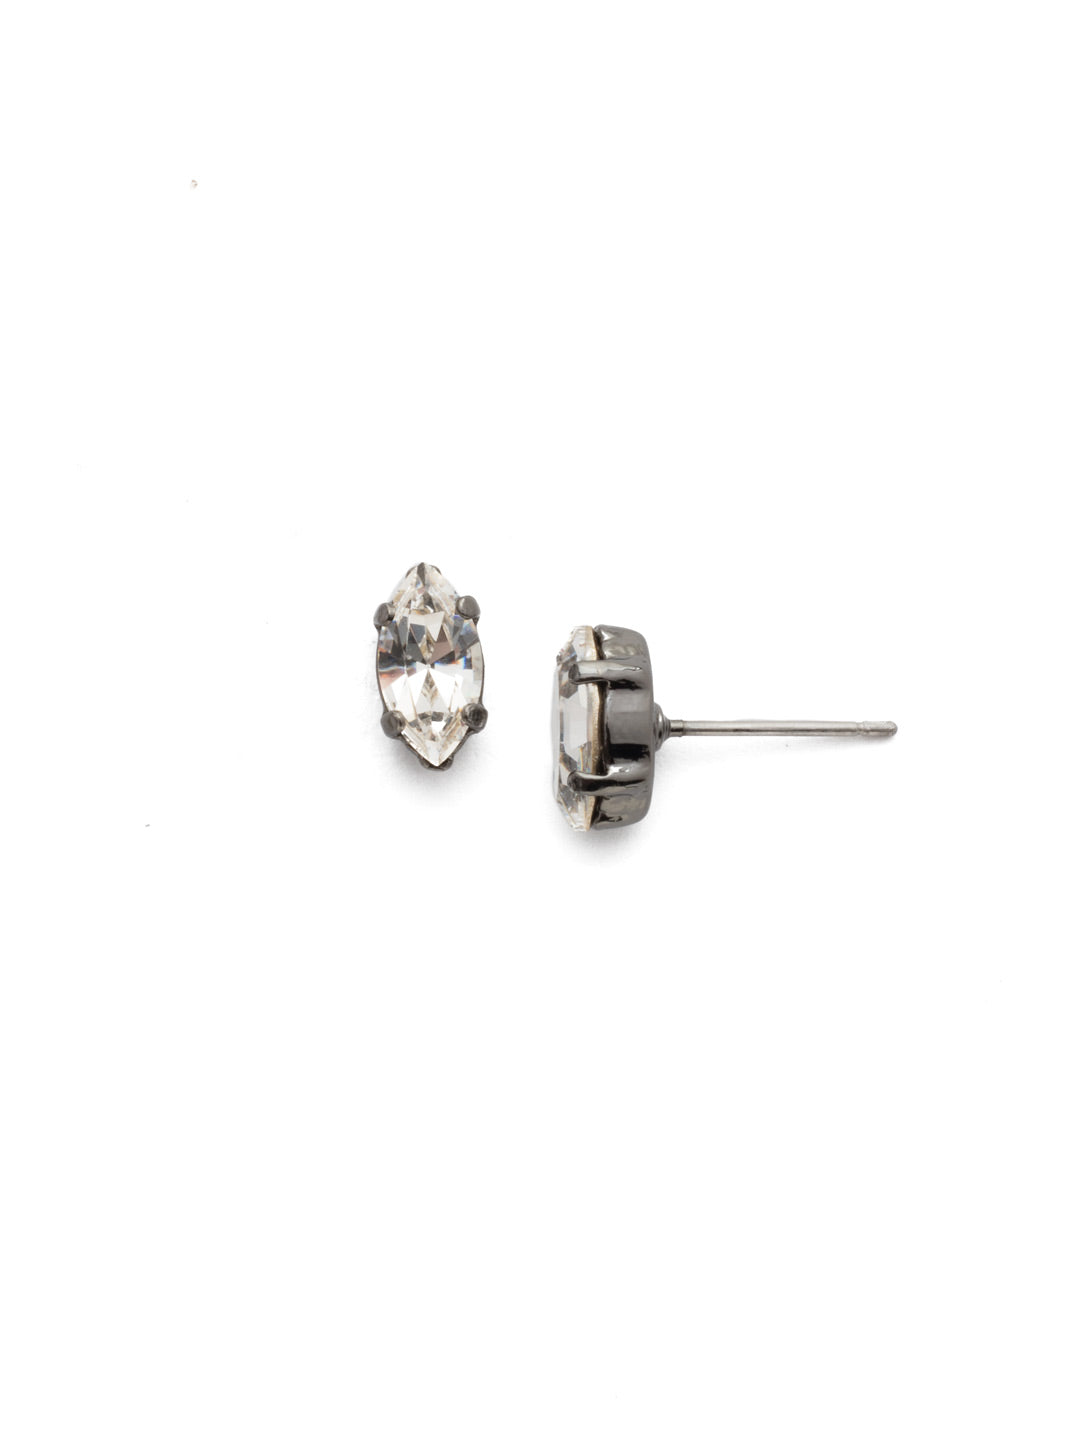 Clarissa Stud Earrings - EEP4GMMMO - <p>The Clarissa Stud Earring is for the lover of classics with a twist. Simple sparkling crystals get an oomph from the navette shape. From Sorrelli's Midnight Moon collection in our Gun Metal finish.</p>